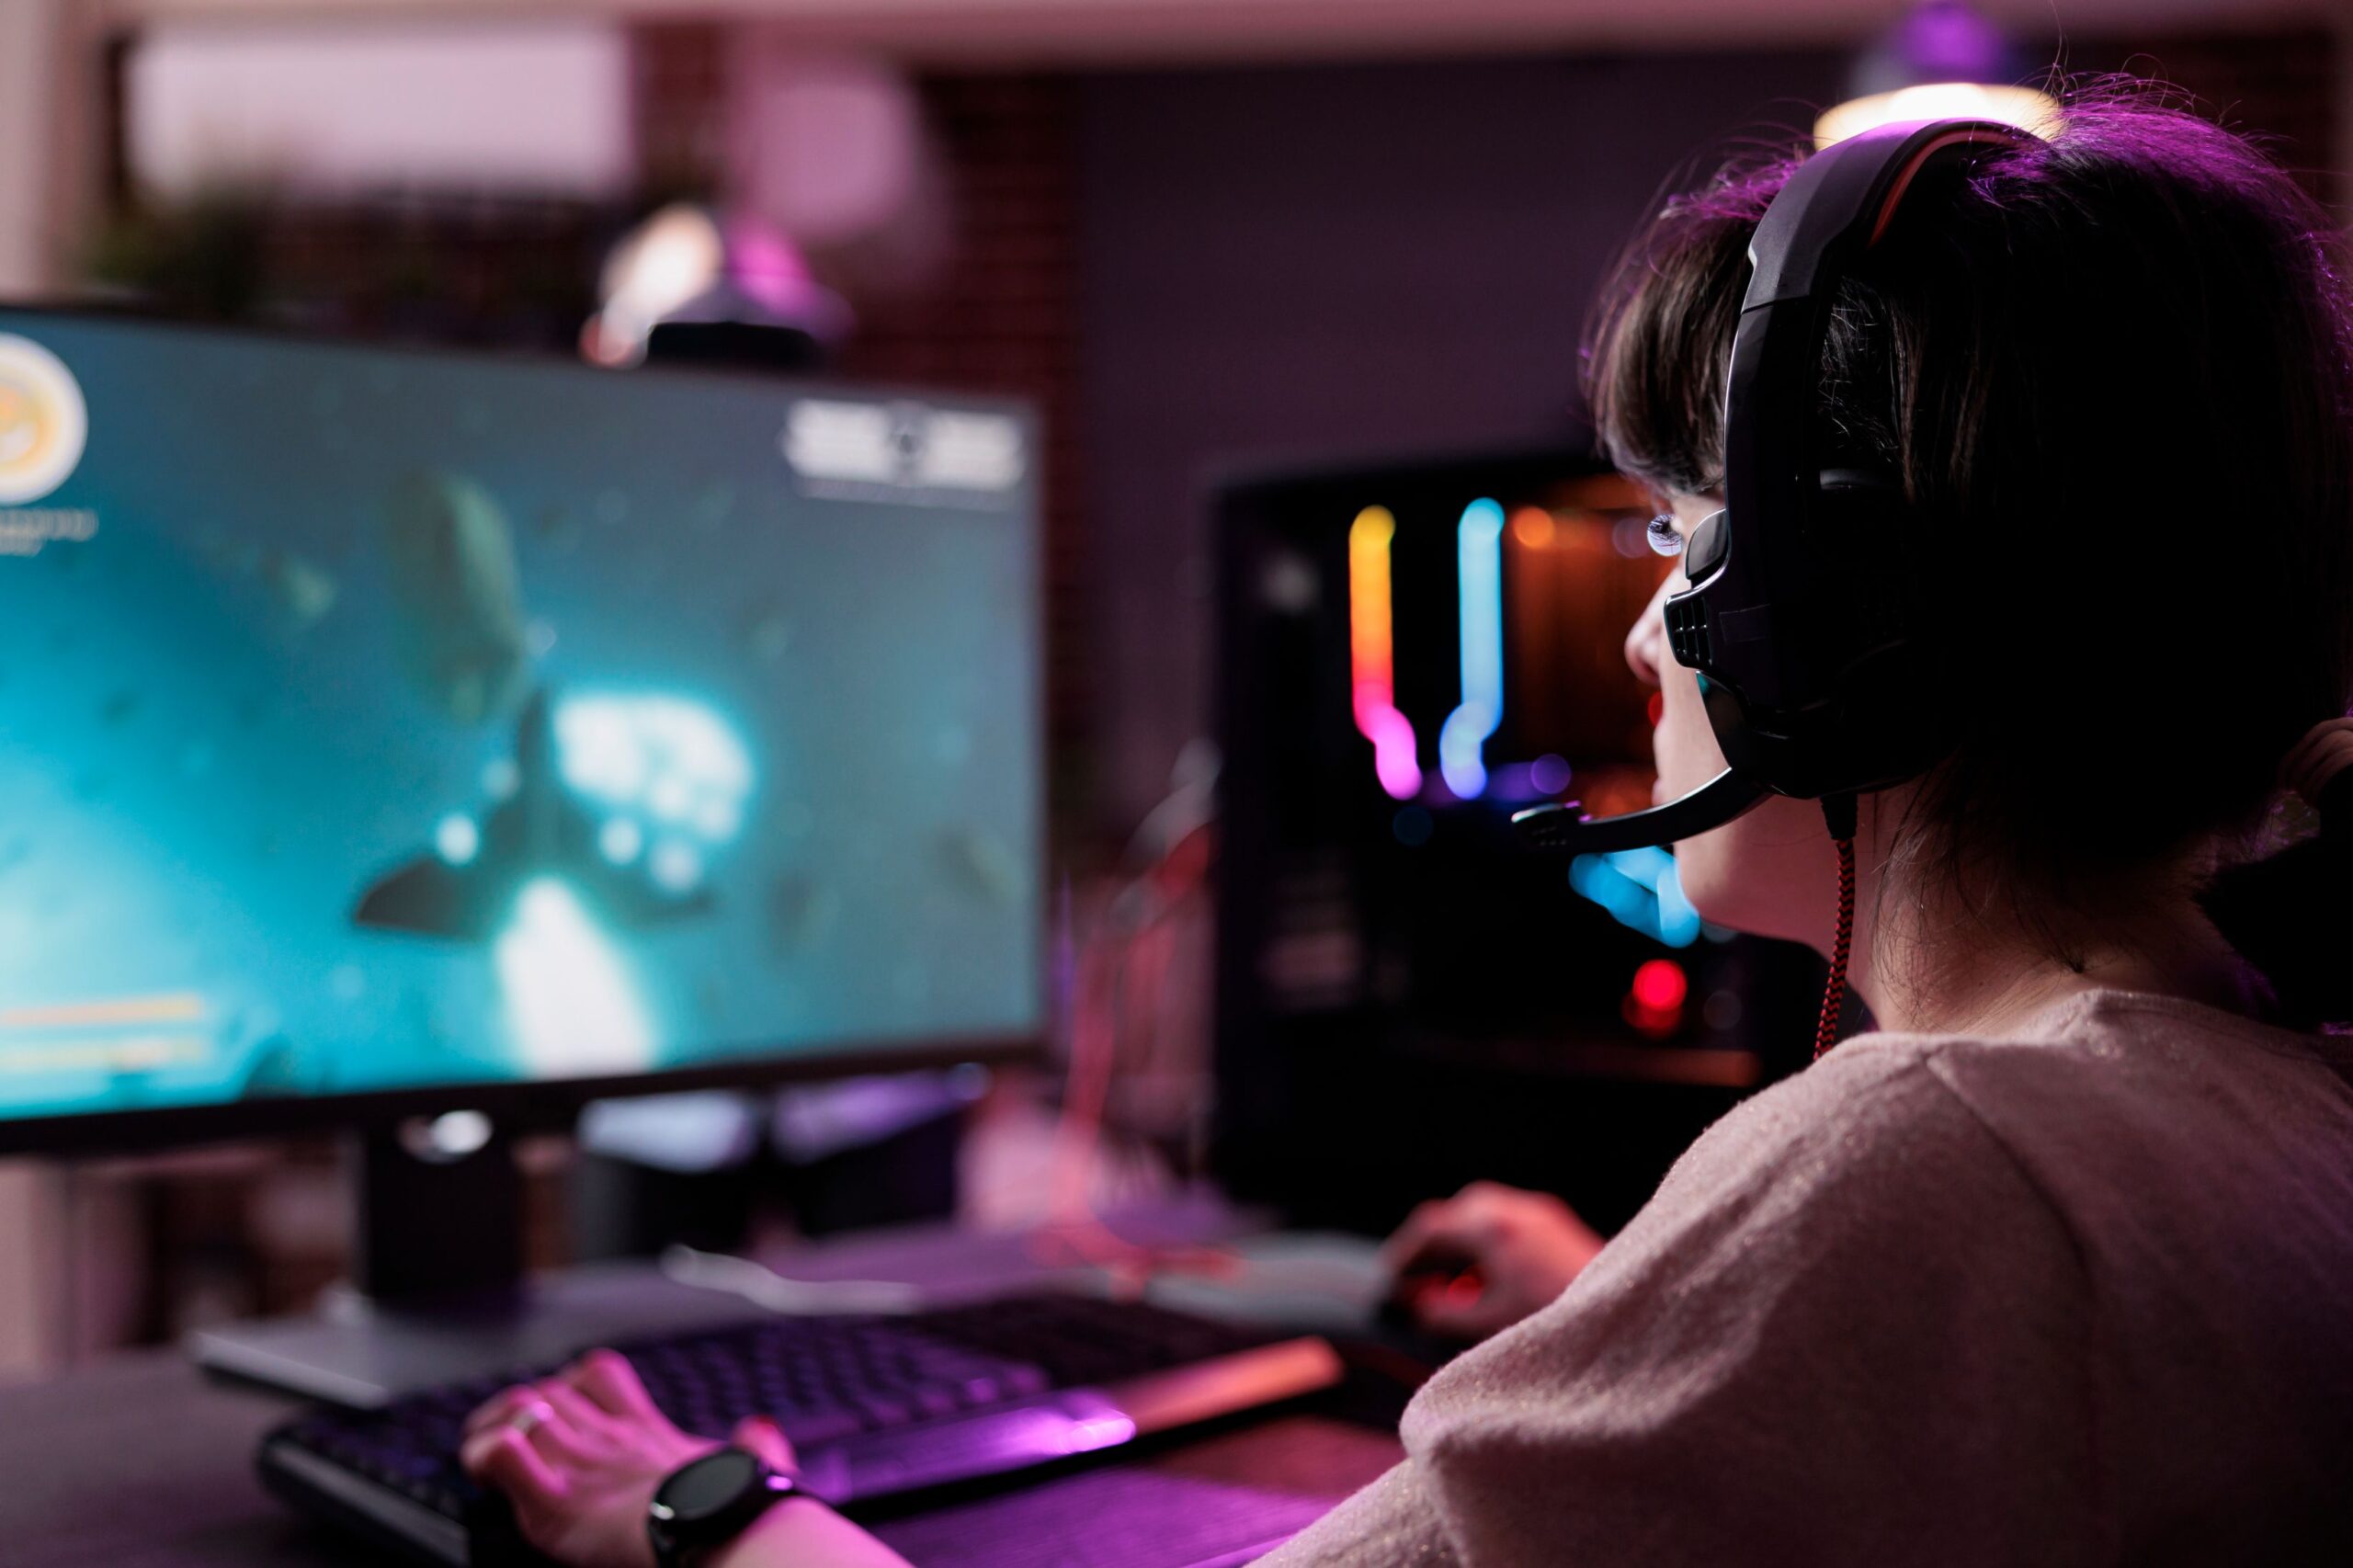 young-streamer-playing-video-games-online-live-stream-using-computer-neon-lights-living-room-female-gamer-having-fun-with-action-gameplay-virtual-shooting-tournament